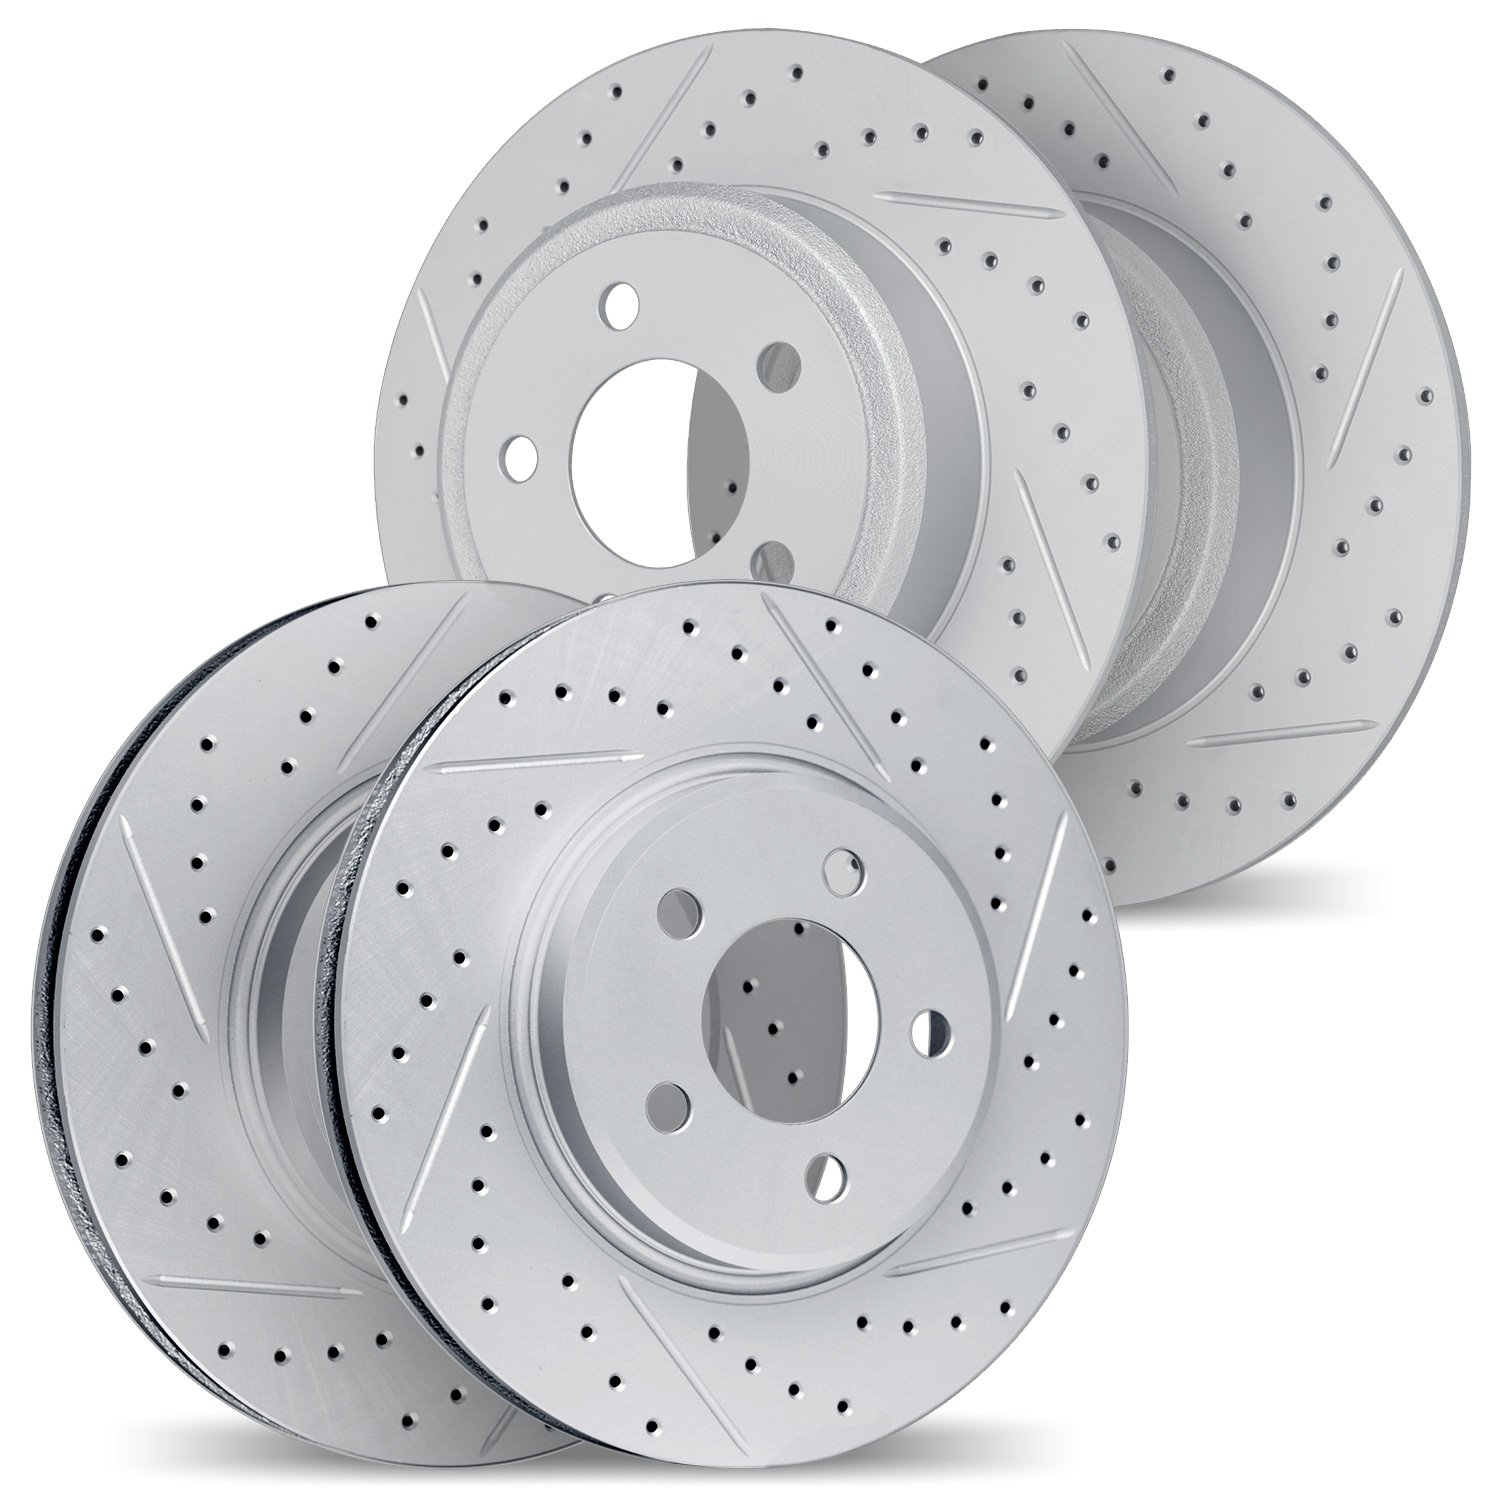 2004-59053 Geoperformance Drilled/Slotted Brake Rotors, Fits Select Acura/Honda, Position: Front and Rear